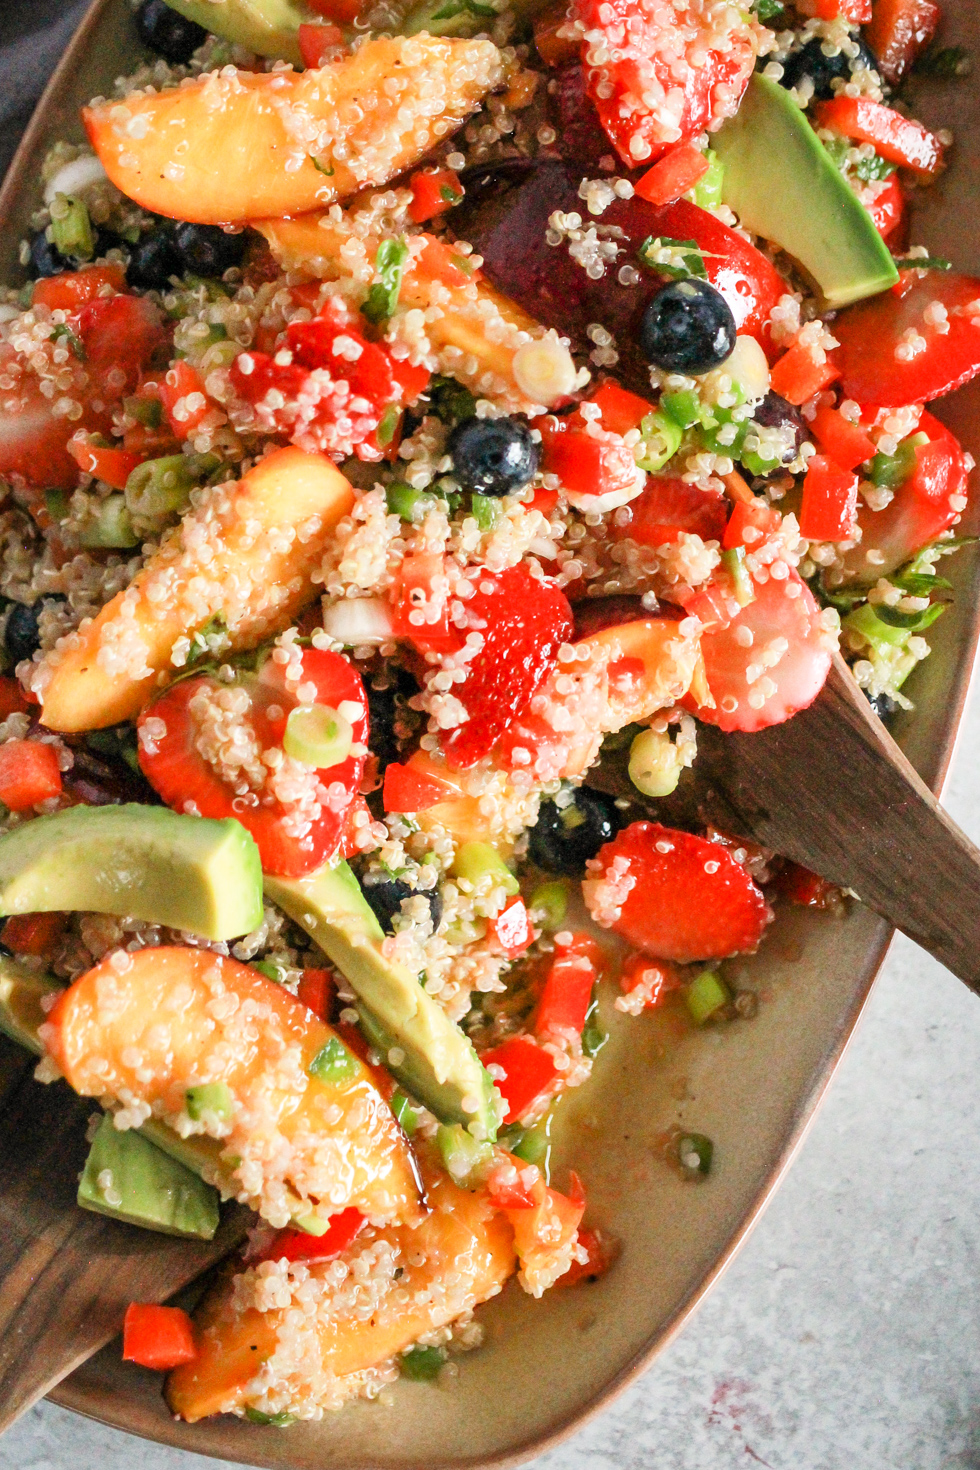 Wooden spoons mixing summer quinoa salad with fruit.